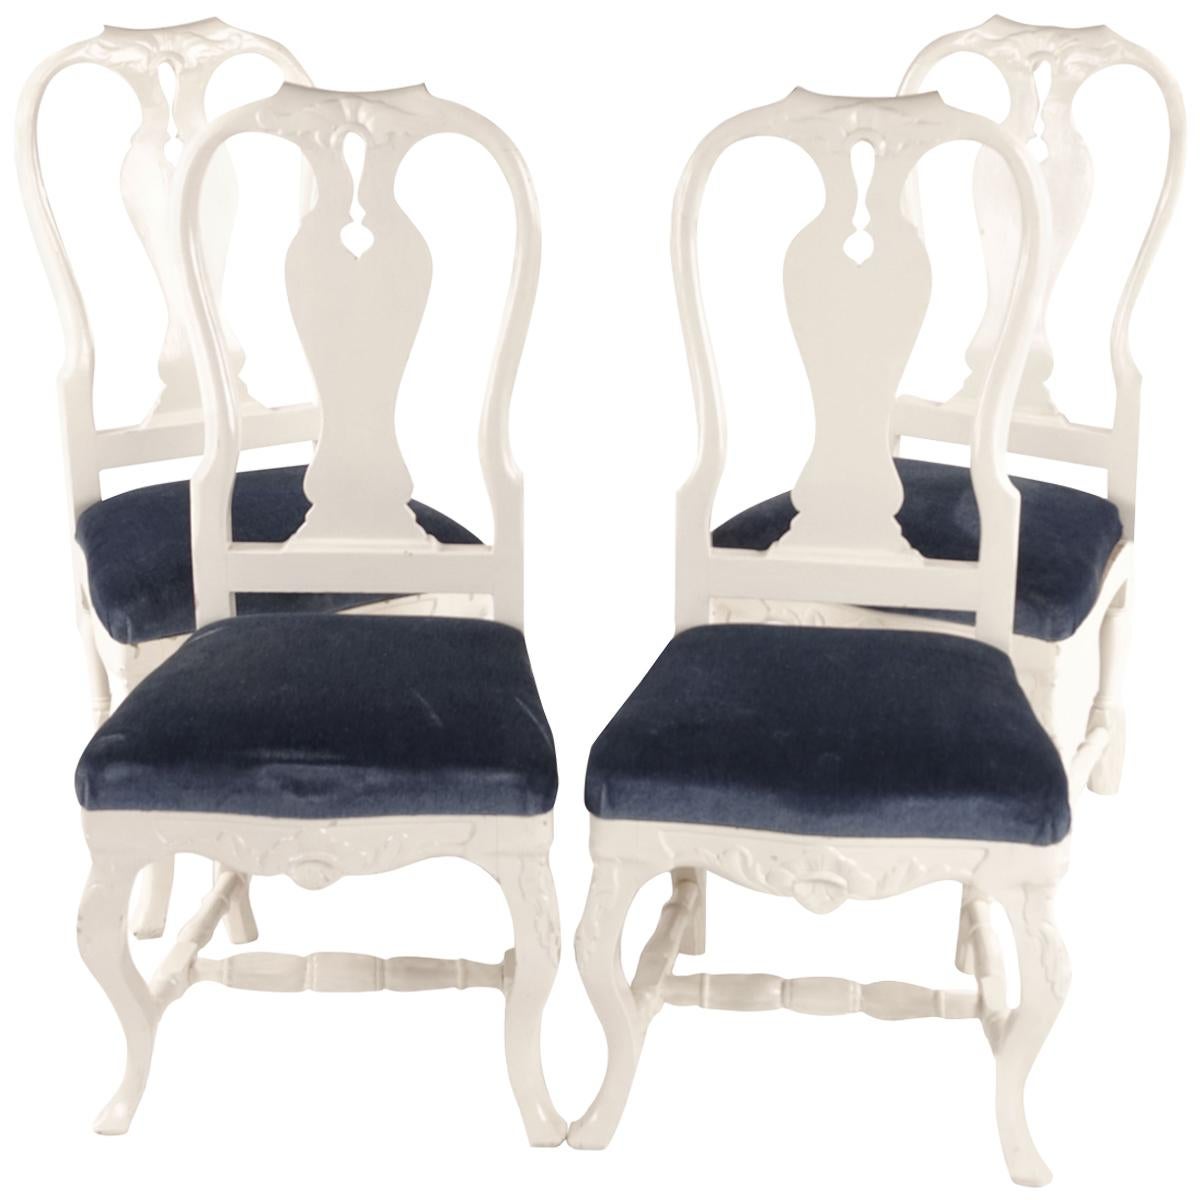 "Bondrokoko" Chairs from Early 1900s Sweden in Painted Birch